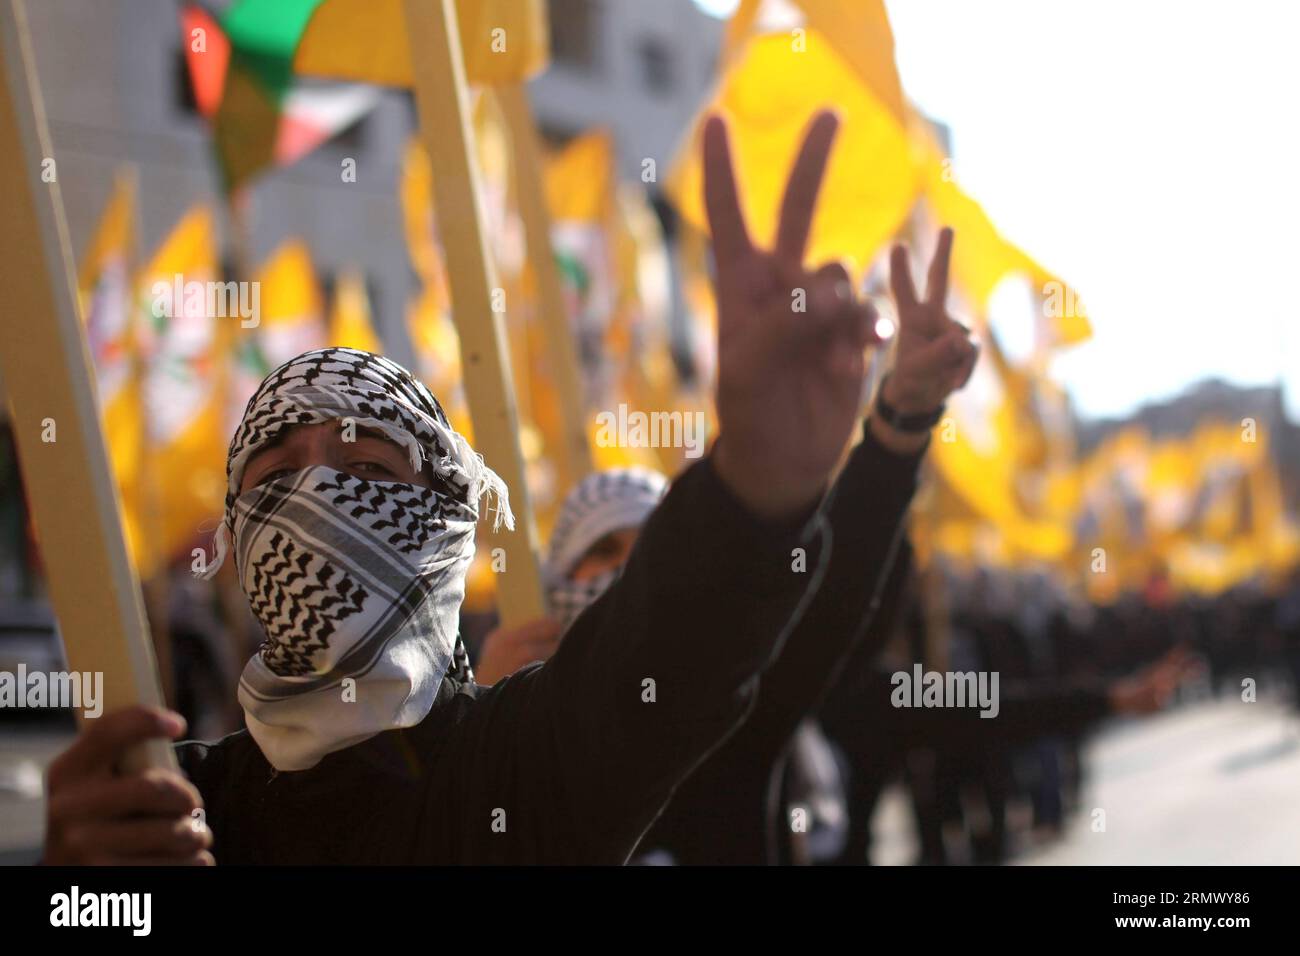 (141115) -- BETHLEHEM, Nov. 15, 2014 -- Palestinian Fatah supporters take part in a rally to mark the 26th anniversary of Palestinian Independence Declaration Day in the West Bank city of Bethlehem, Nov. 15, 2014. Late Palestinian leader Yasser Arafat made the declaration of independence when the Palestinian National Council (PNC), or the Palestinian Parliament in exile, was held in Algeria on Nov. 15, 1988. ) MIDEAST-BETHLEHEM-PALESTINE-INDEPENDENCE DECLARATION DAY-ANNIVERSARY LuayxSababa PUBLICATIONxNOTxINxCHN   Bethlehem Nov 15 2014 PALESTINIAN Fatah Supporters Take Part in a Rally to Mark Stock Photo